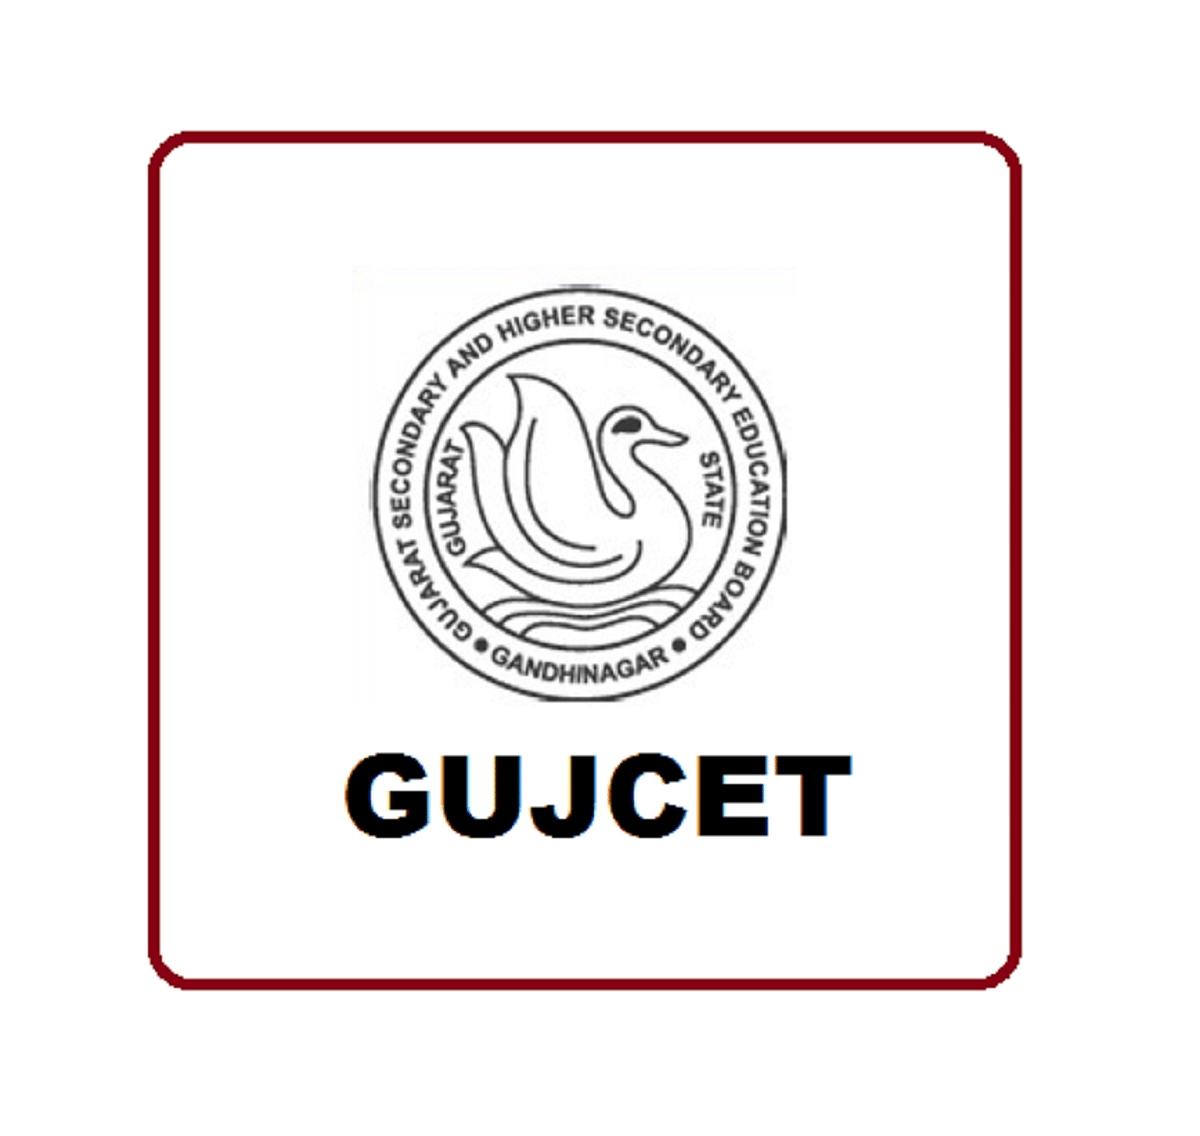 GUJCET 2020: Admit Card Release Date Announced, Exam Schedule Here